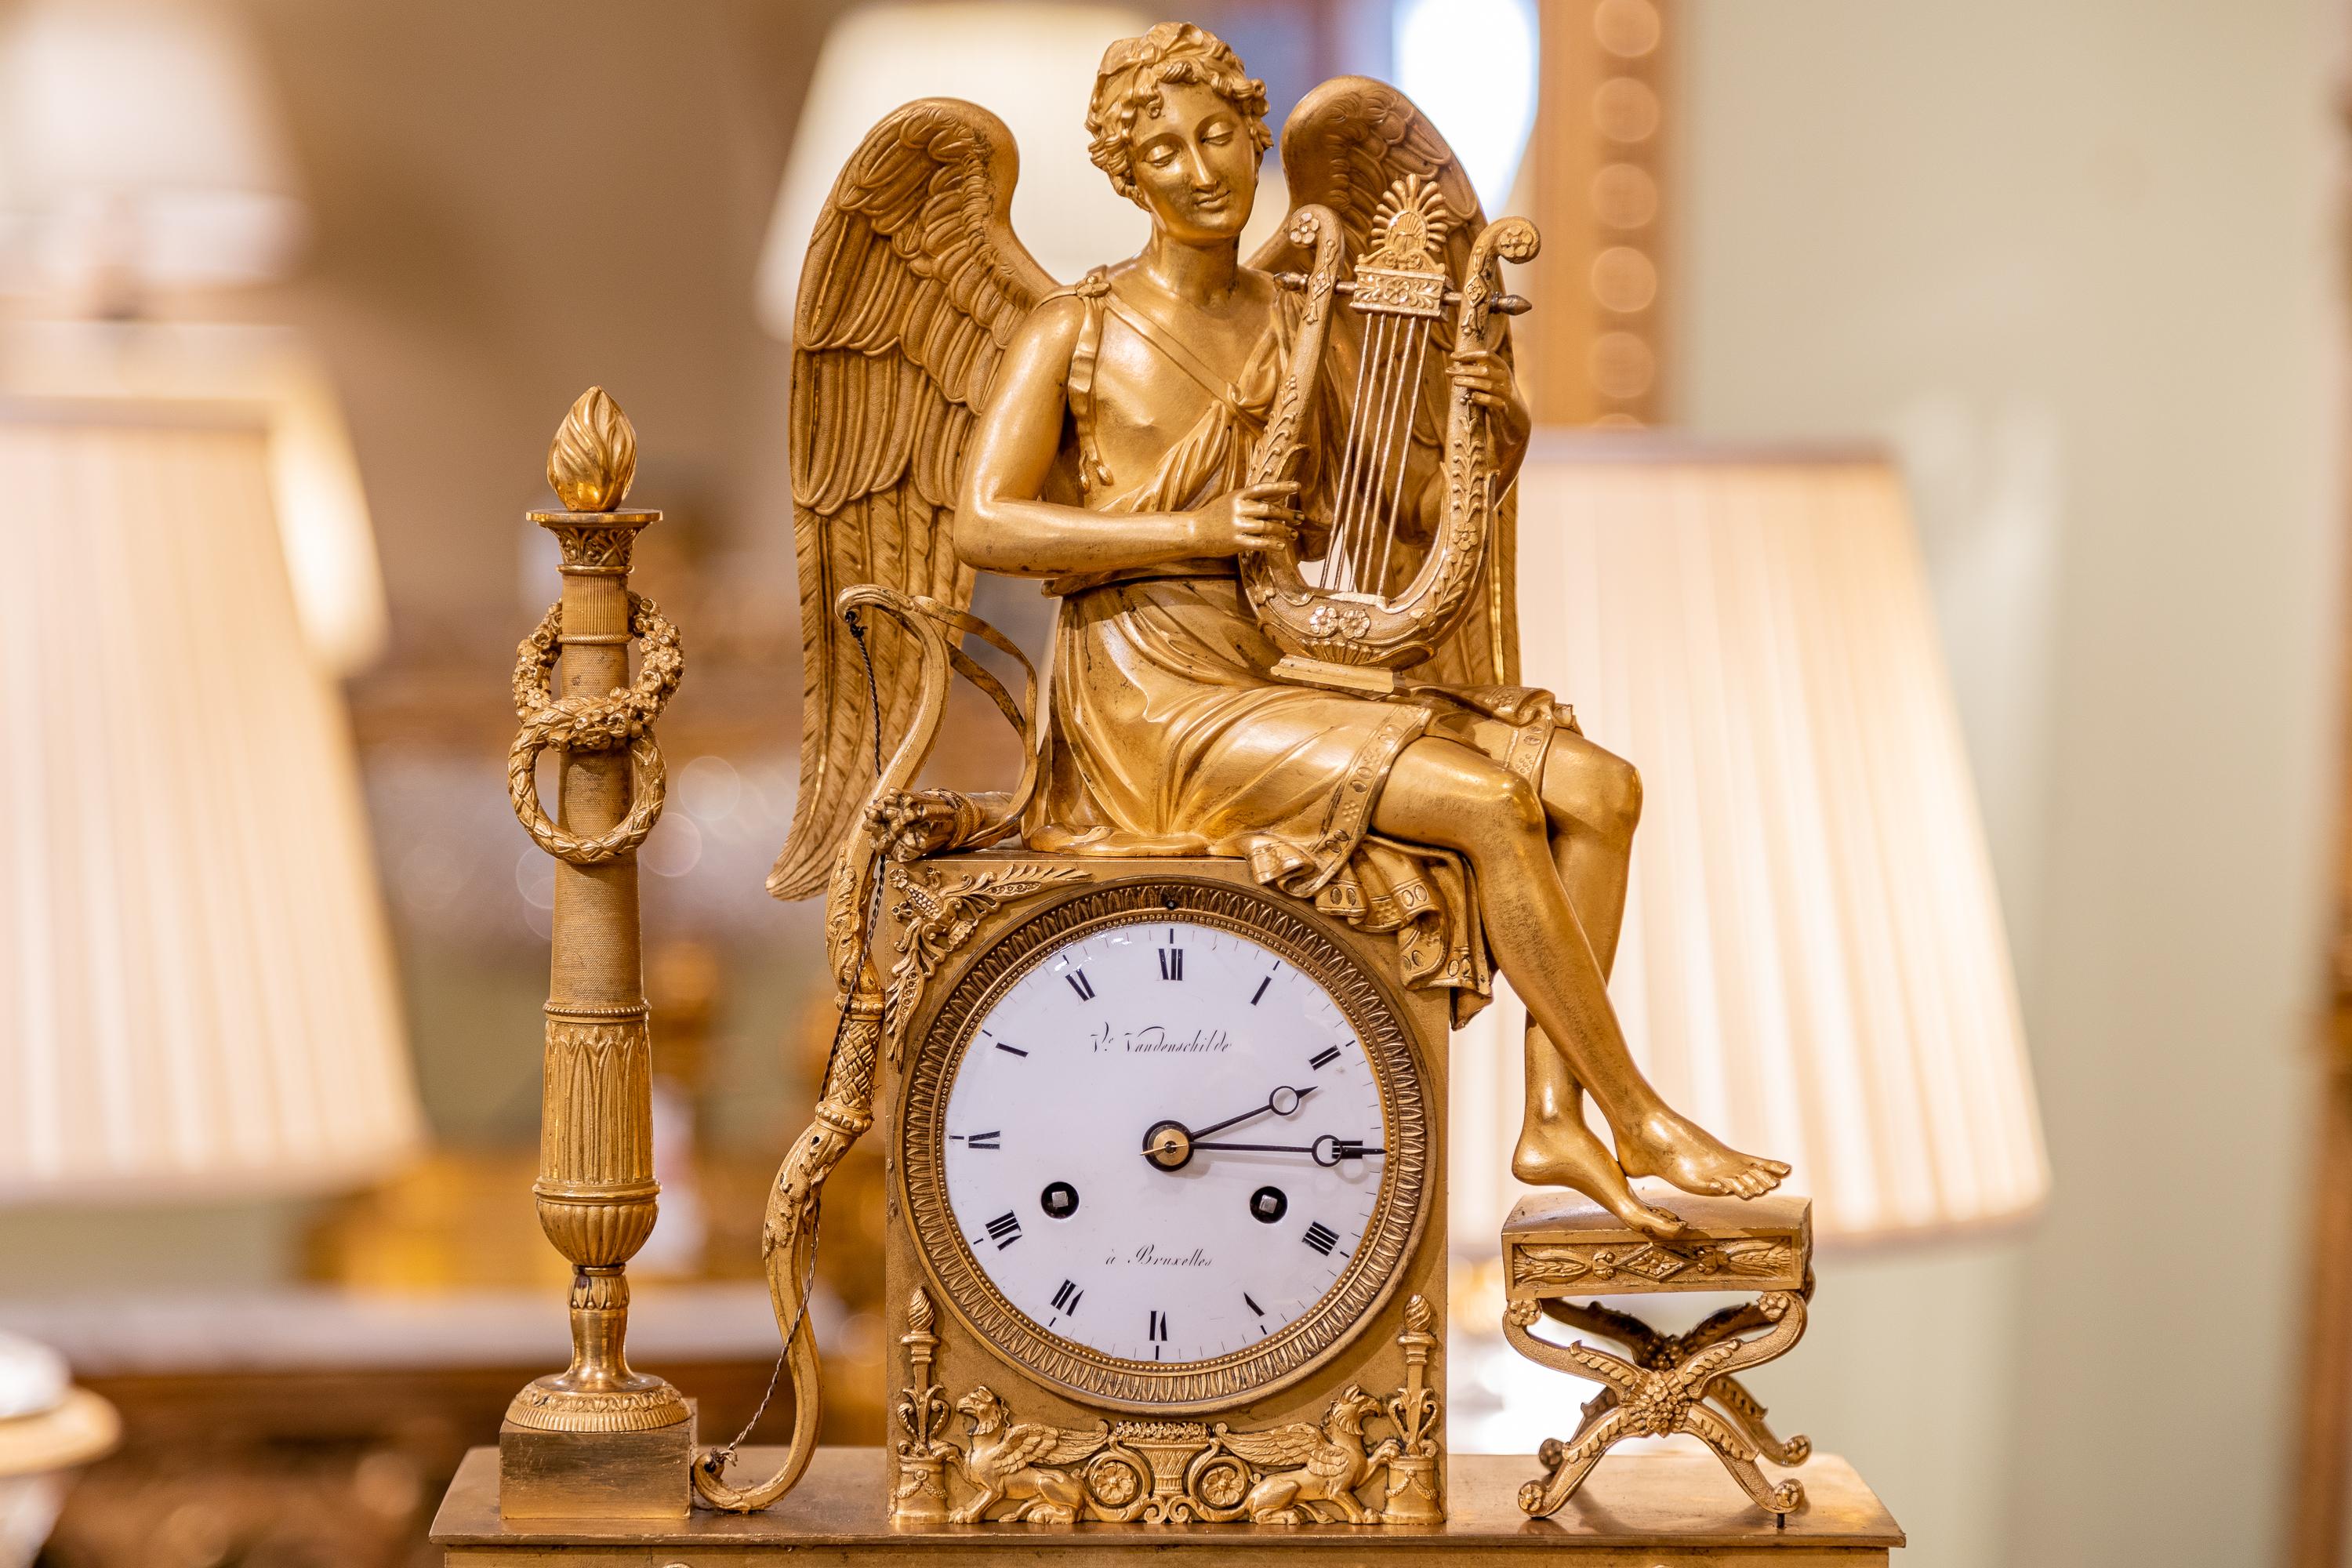 A very fine and rare late 18th century French mercury gilt bronze Empire clock. Signed V Vandenchildes a Brussels.